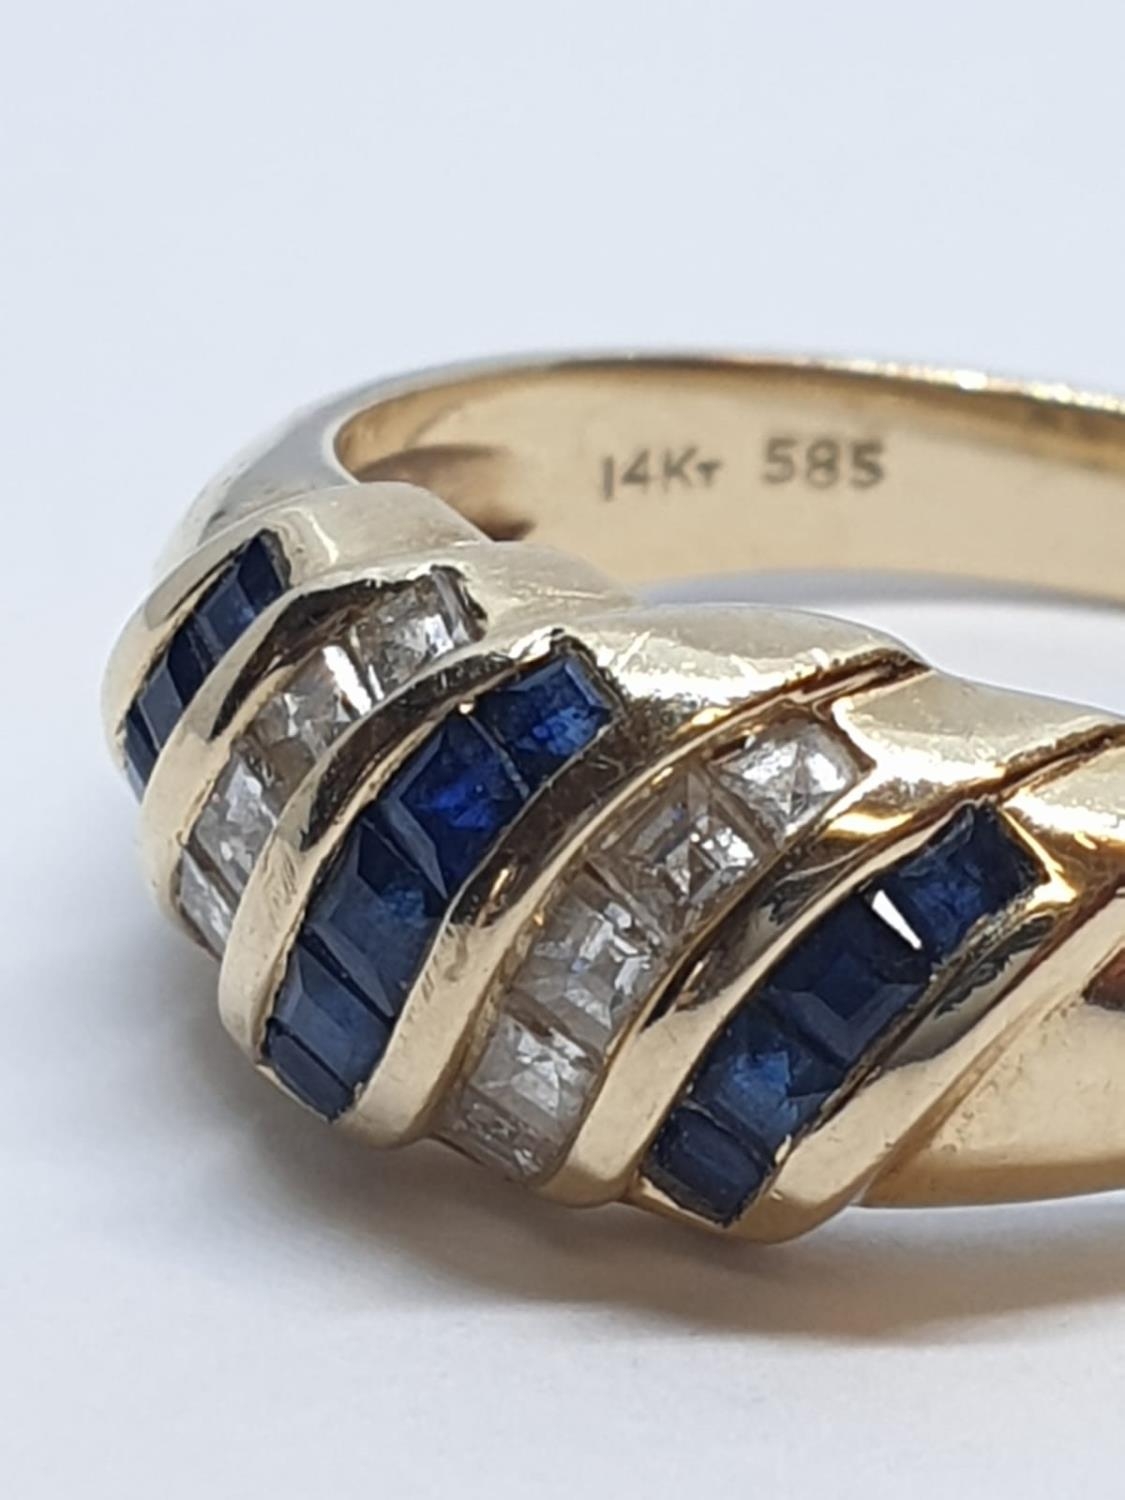 14ct Yellow gold diamond and sapphire ring. Weight 4.2g, Size N. - Image 7 of 9